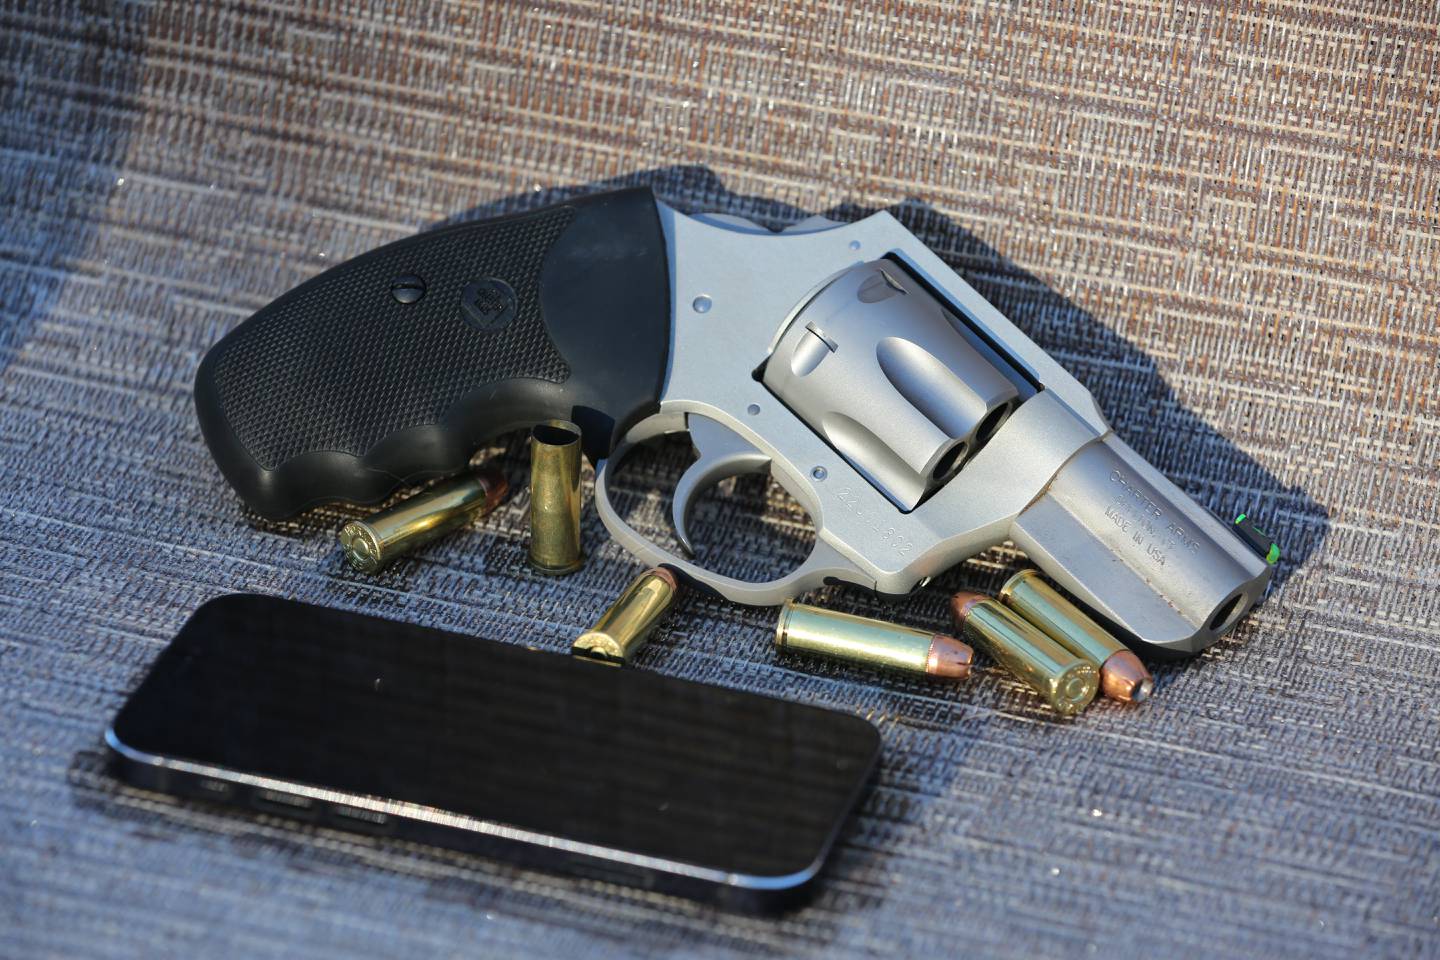 There are a lot of pocket-sized revolvers out there these days